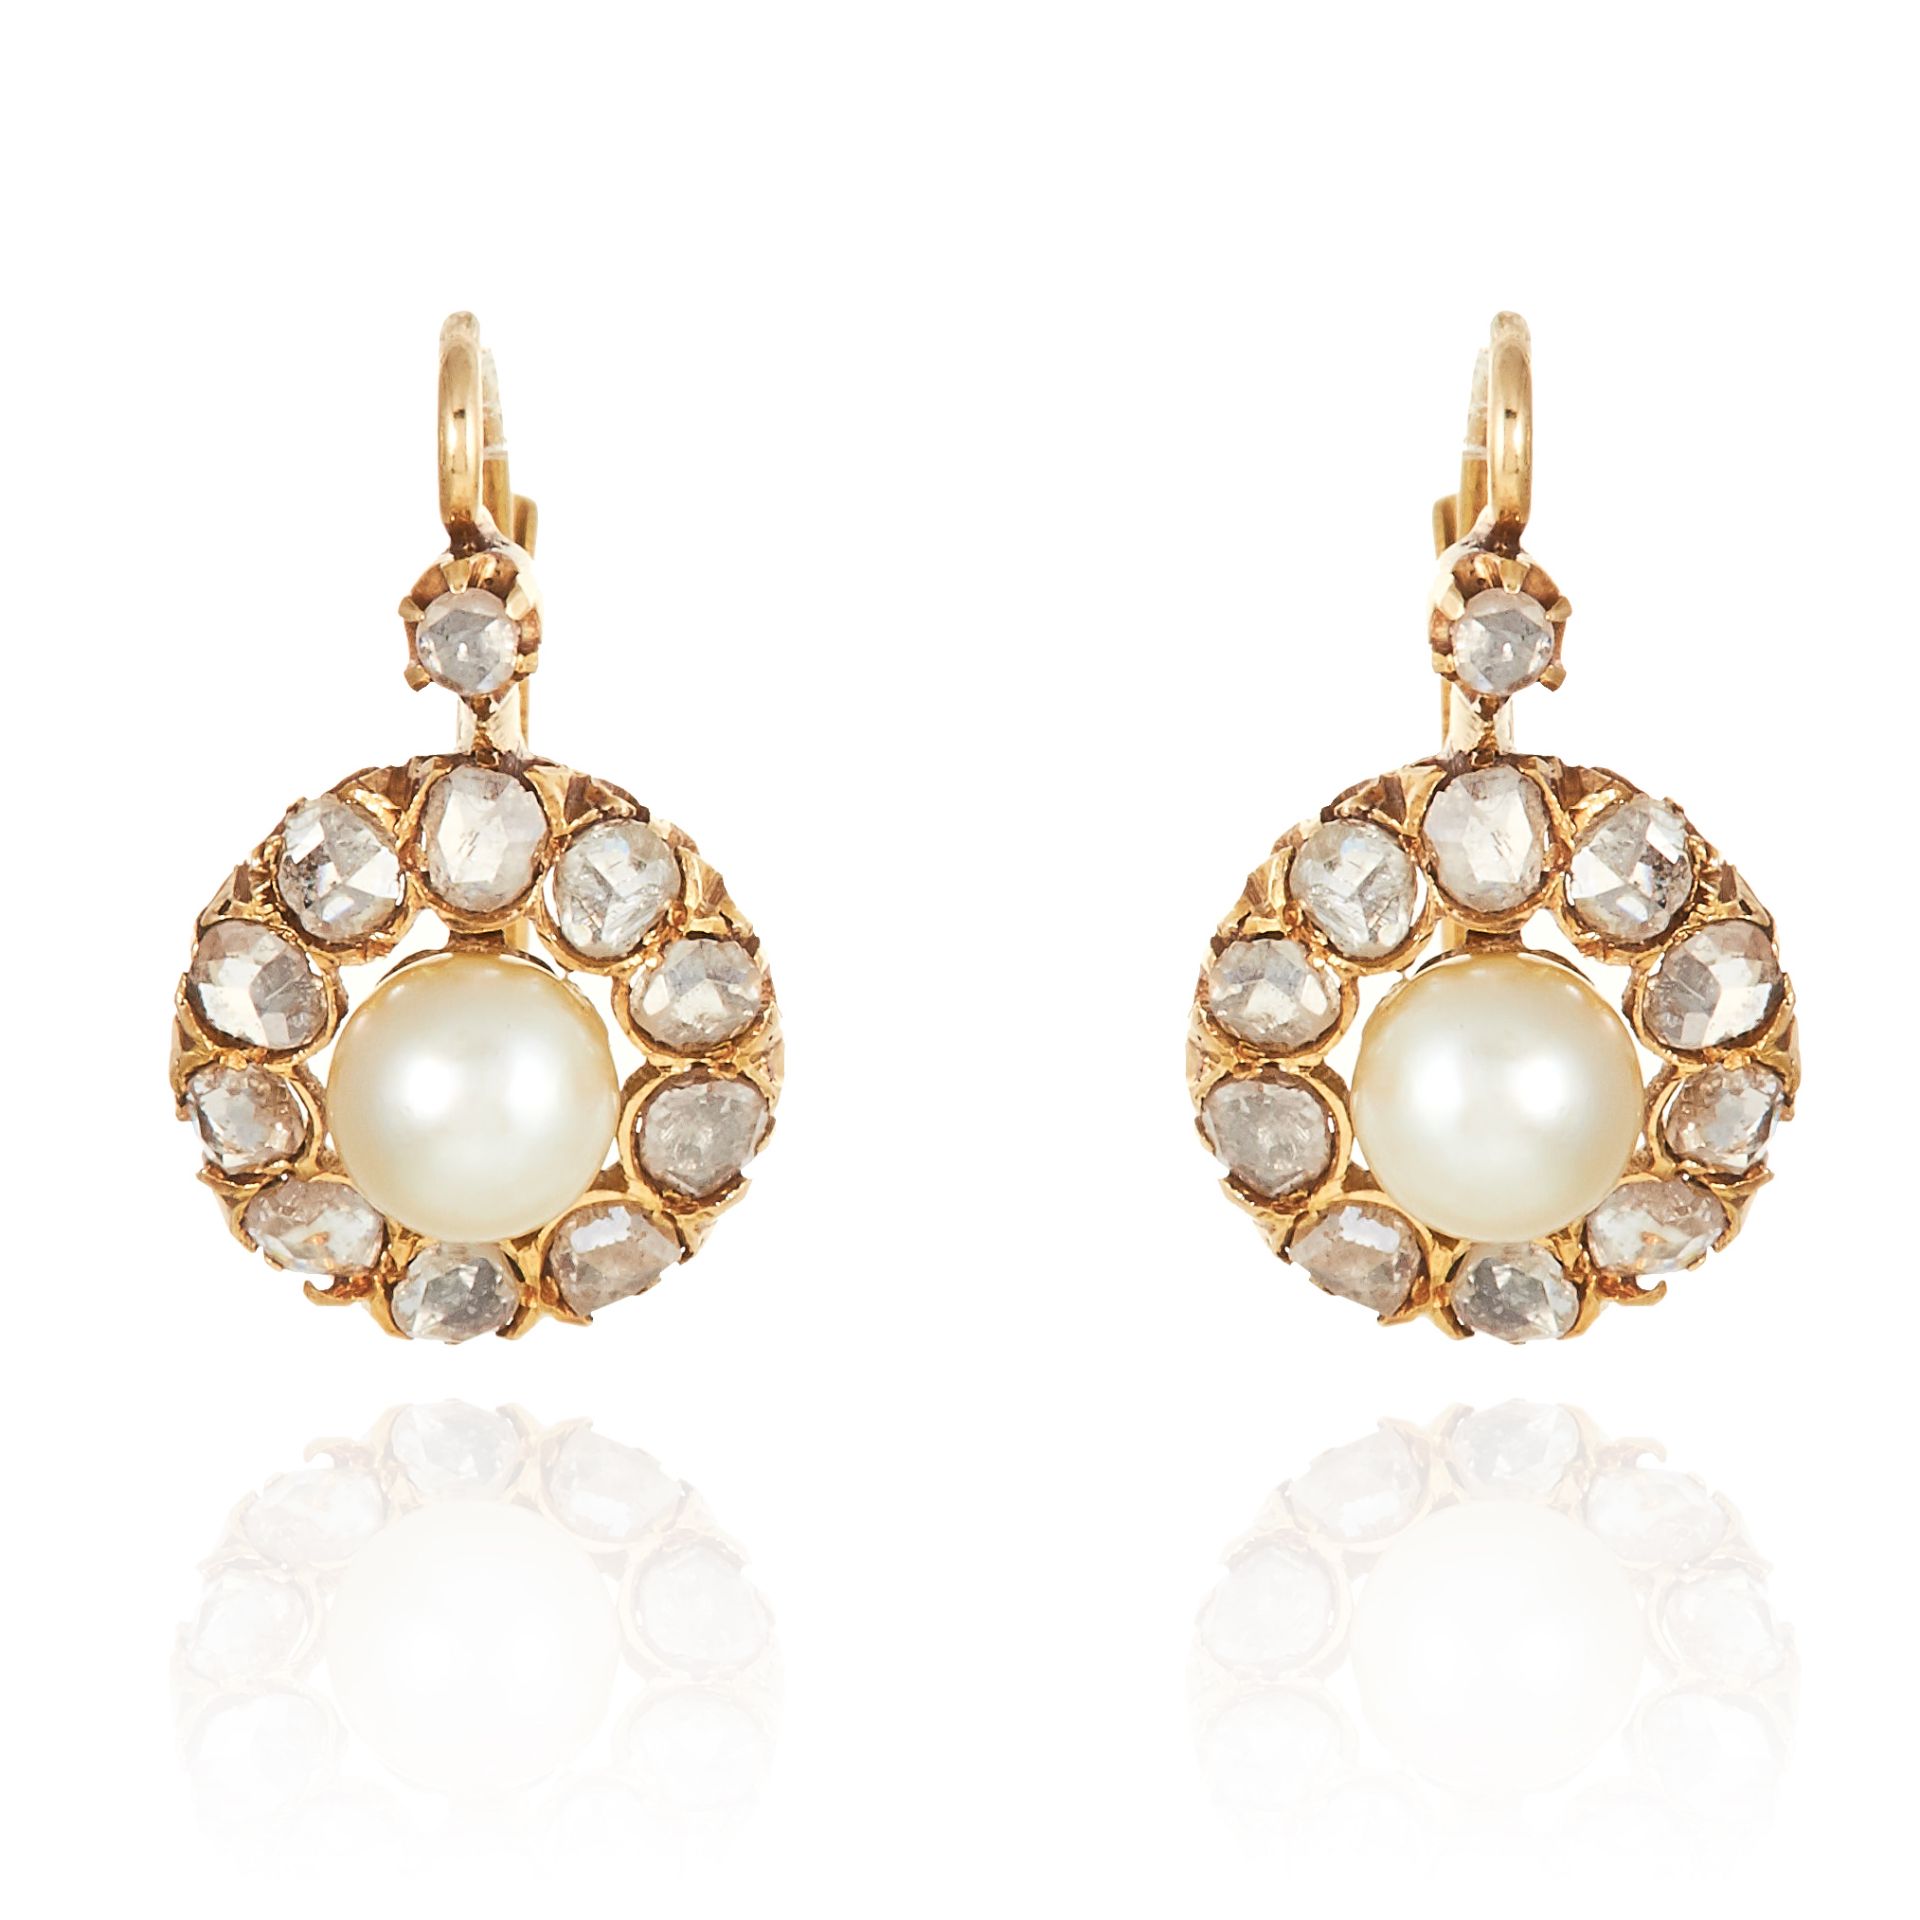 A PAIR OF ANTIQUE PEARL AND DIAMOND CLUSTER EARRINGS in yellow gold, set with a central pearl of